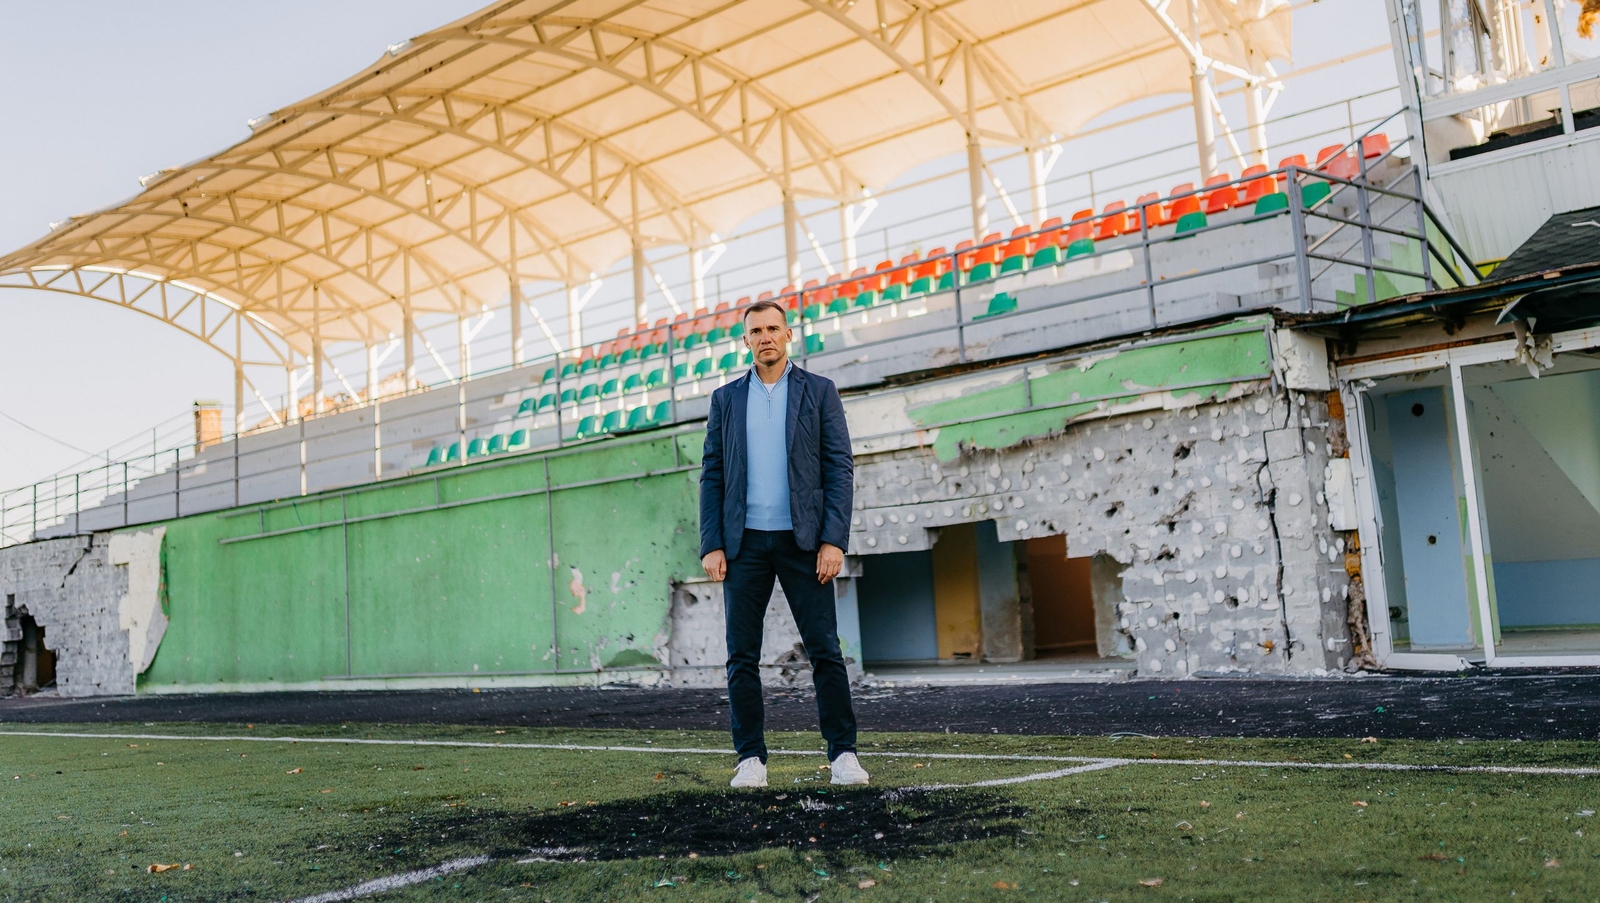 Andriy Shevchenko and UNITED24 Have Launched a Fundraiser for the Reconstruction of Irpin Stadium